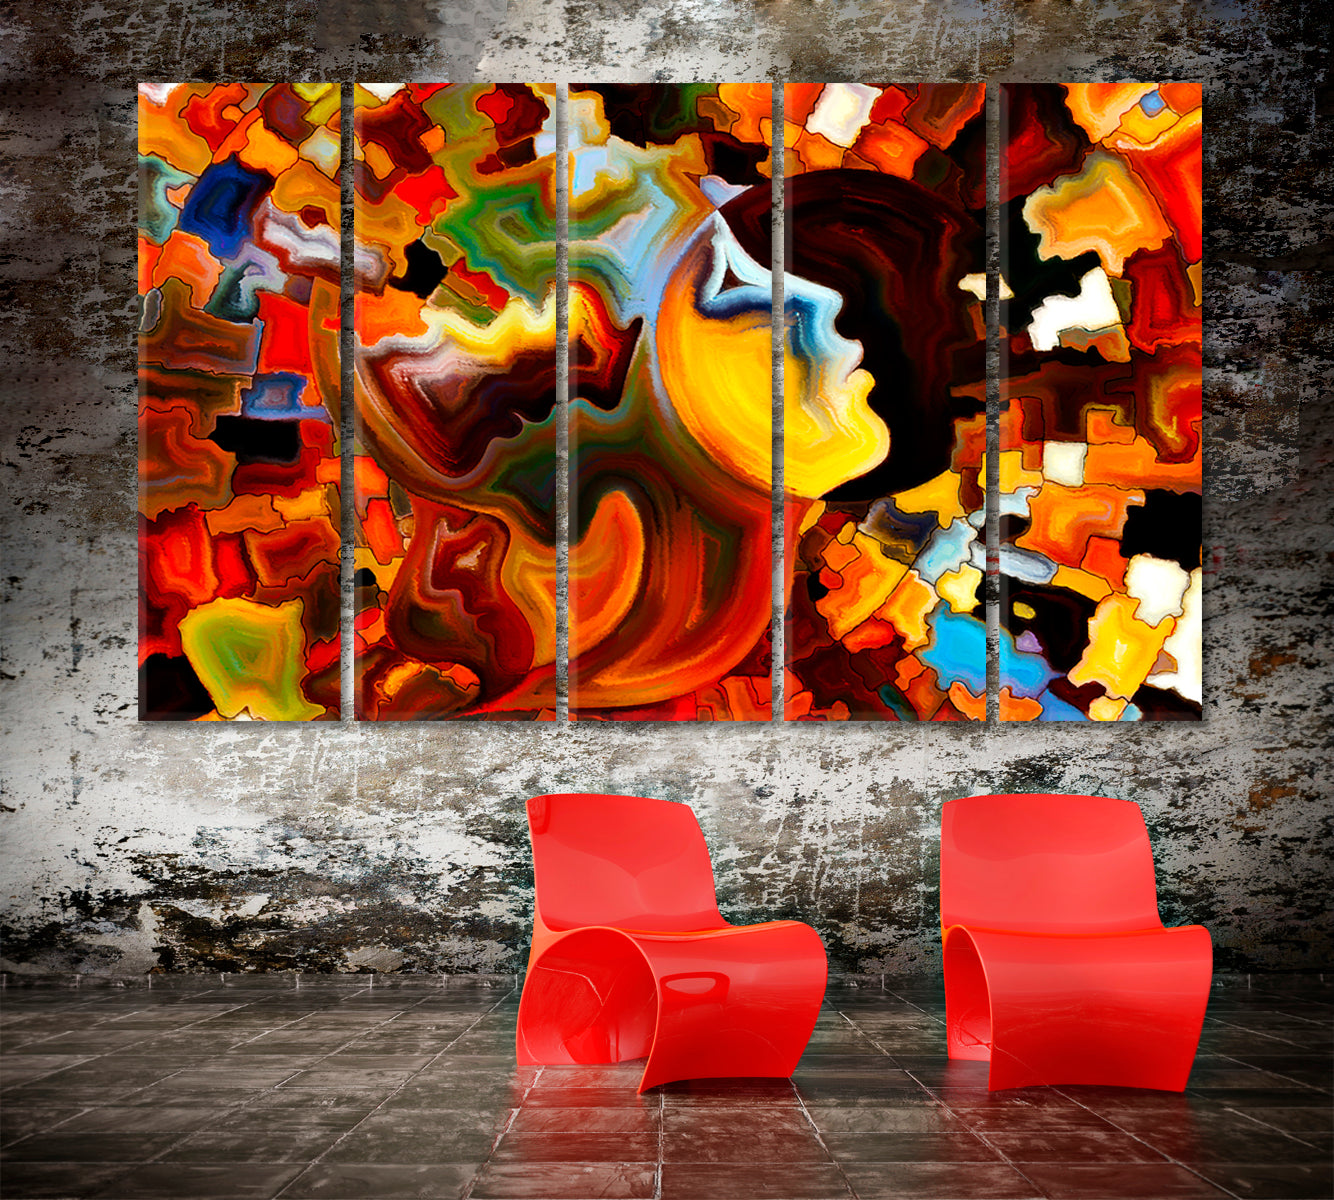 Colors And People Contemporary Art Artesty 5 panels 36" x 24" 